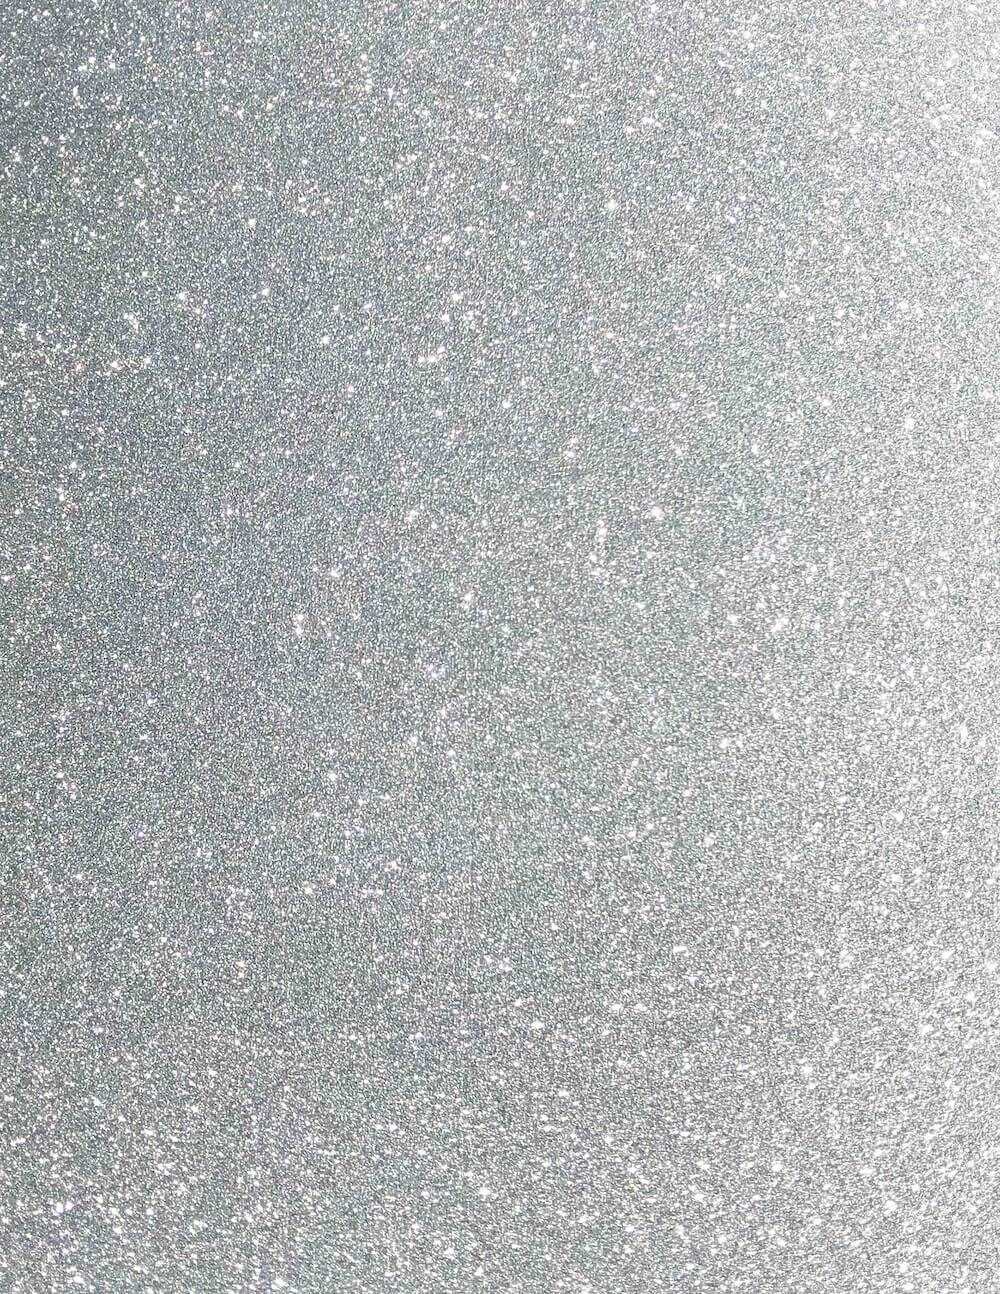 Silver Non-Shedding Glitter Cardstock for Cards and Paper Flowers 10 Sheets